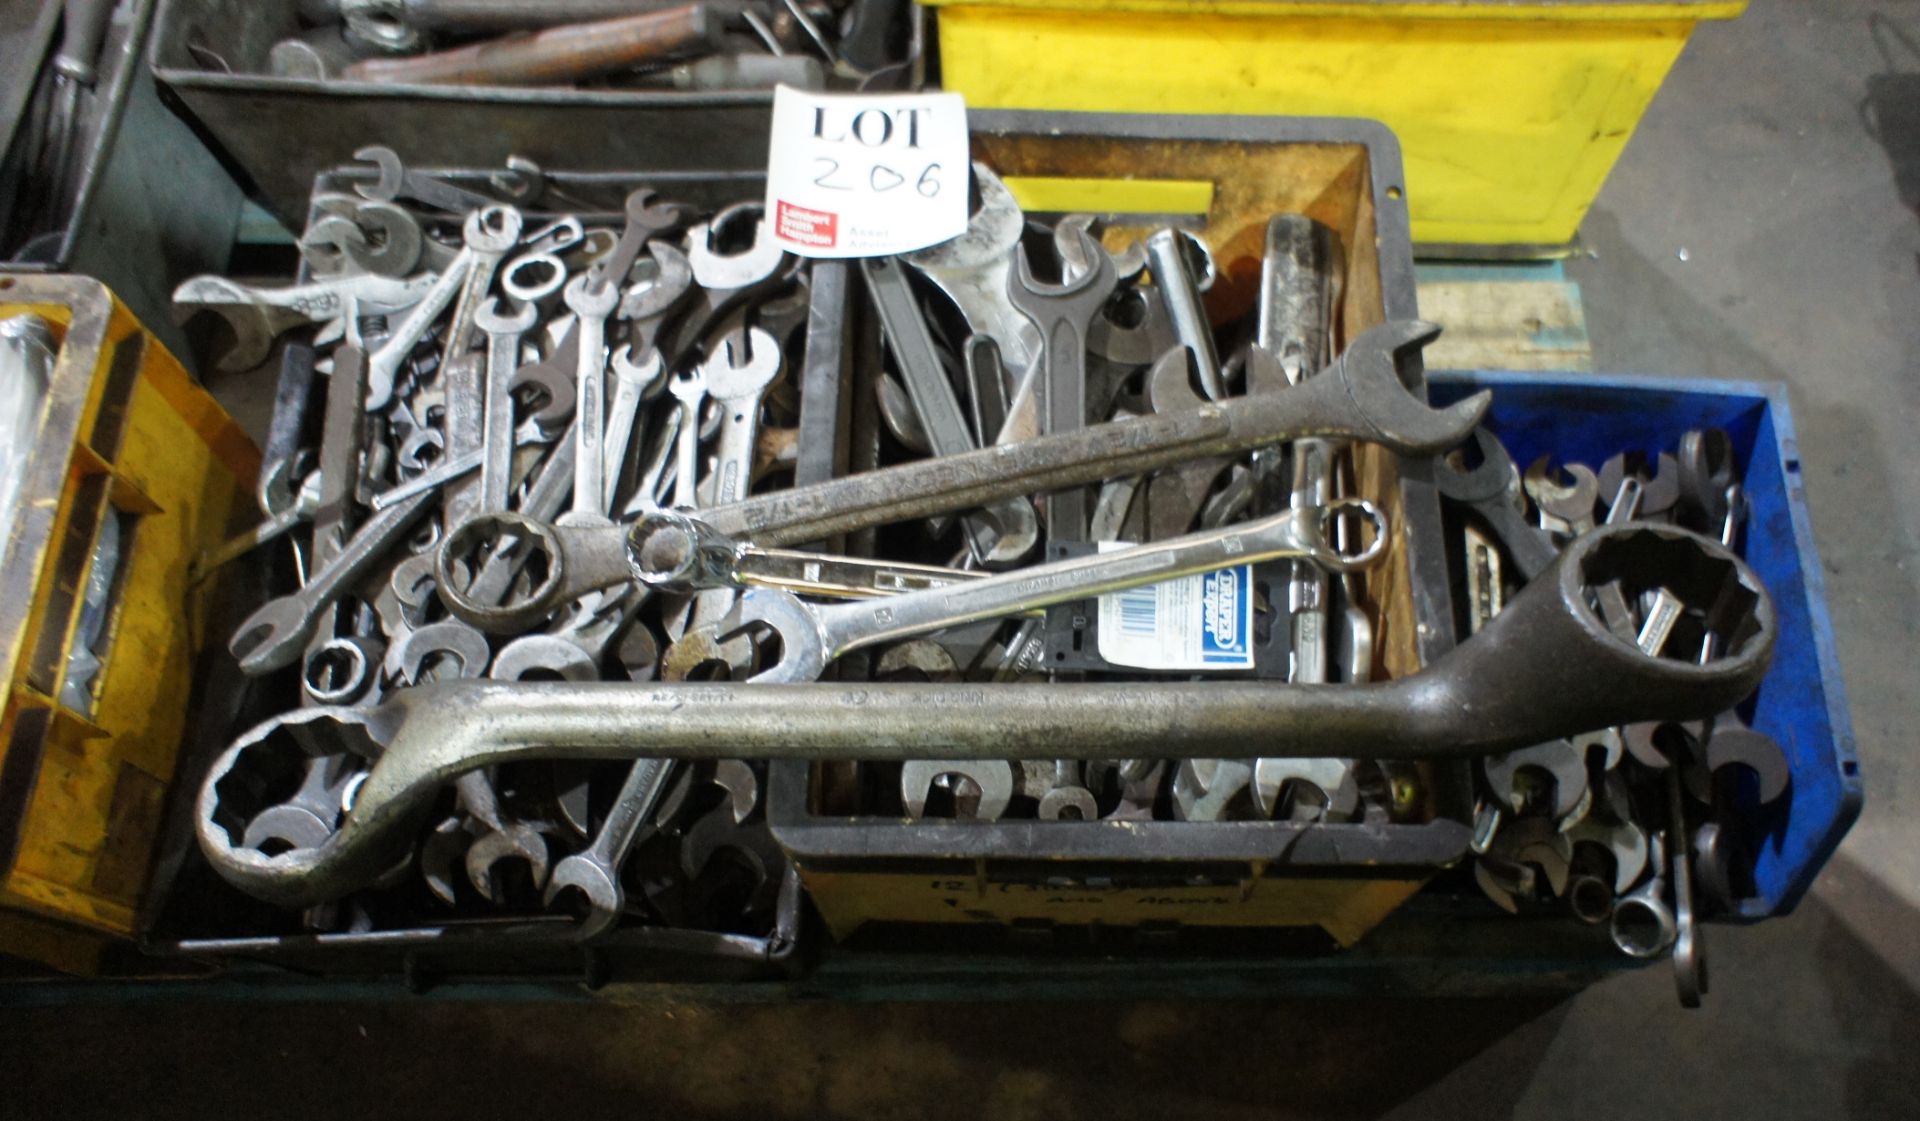 Large quantity of various spanners, to 3 boxes